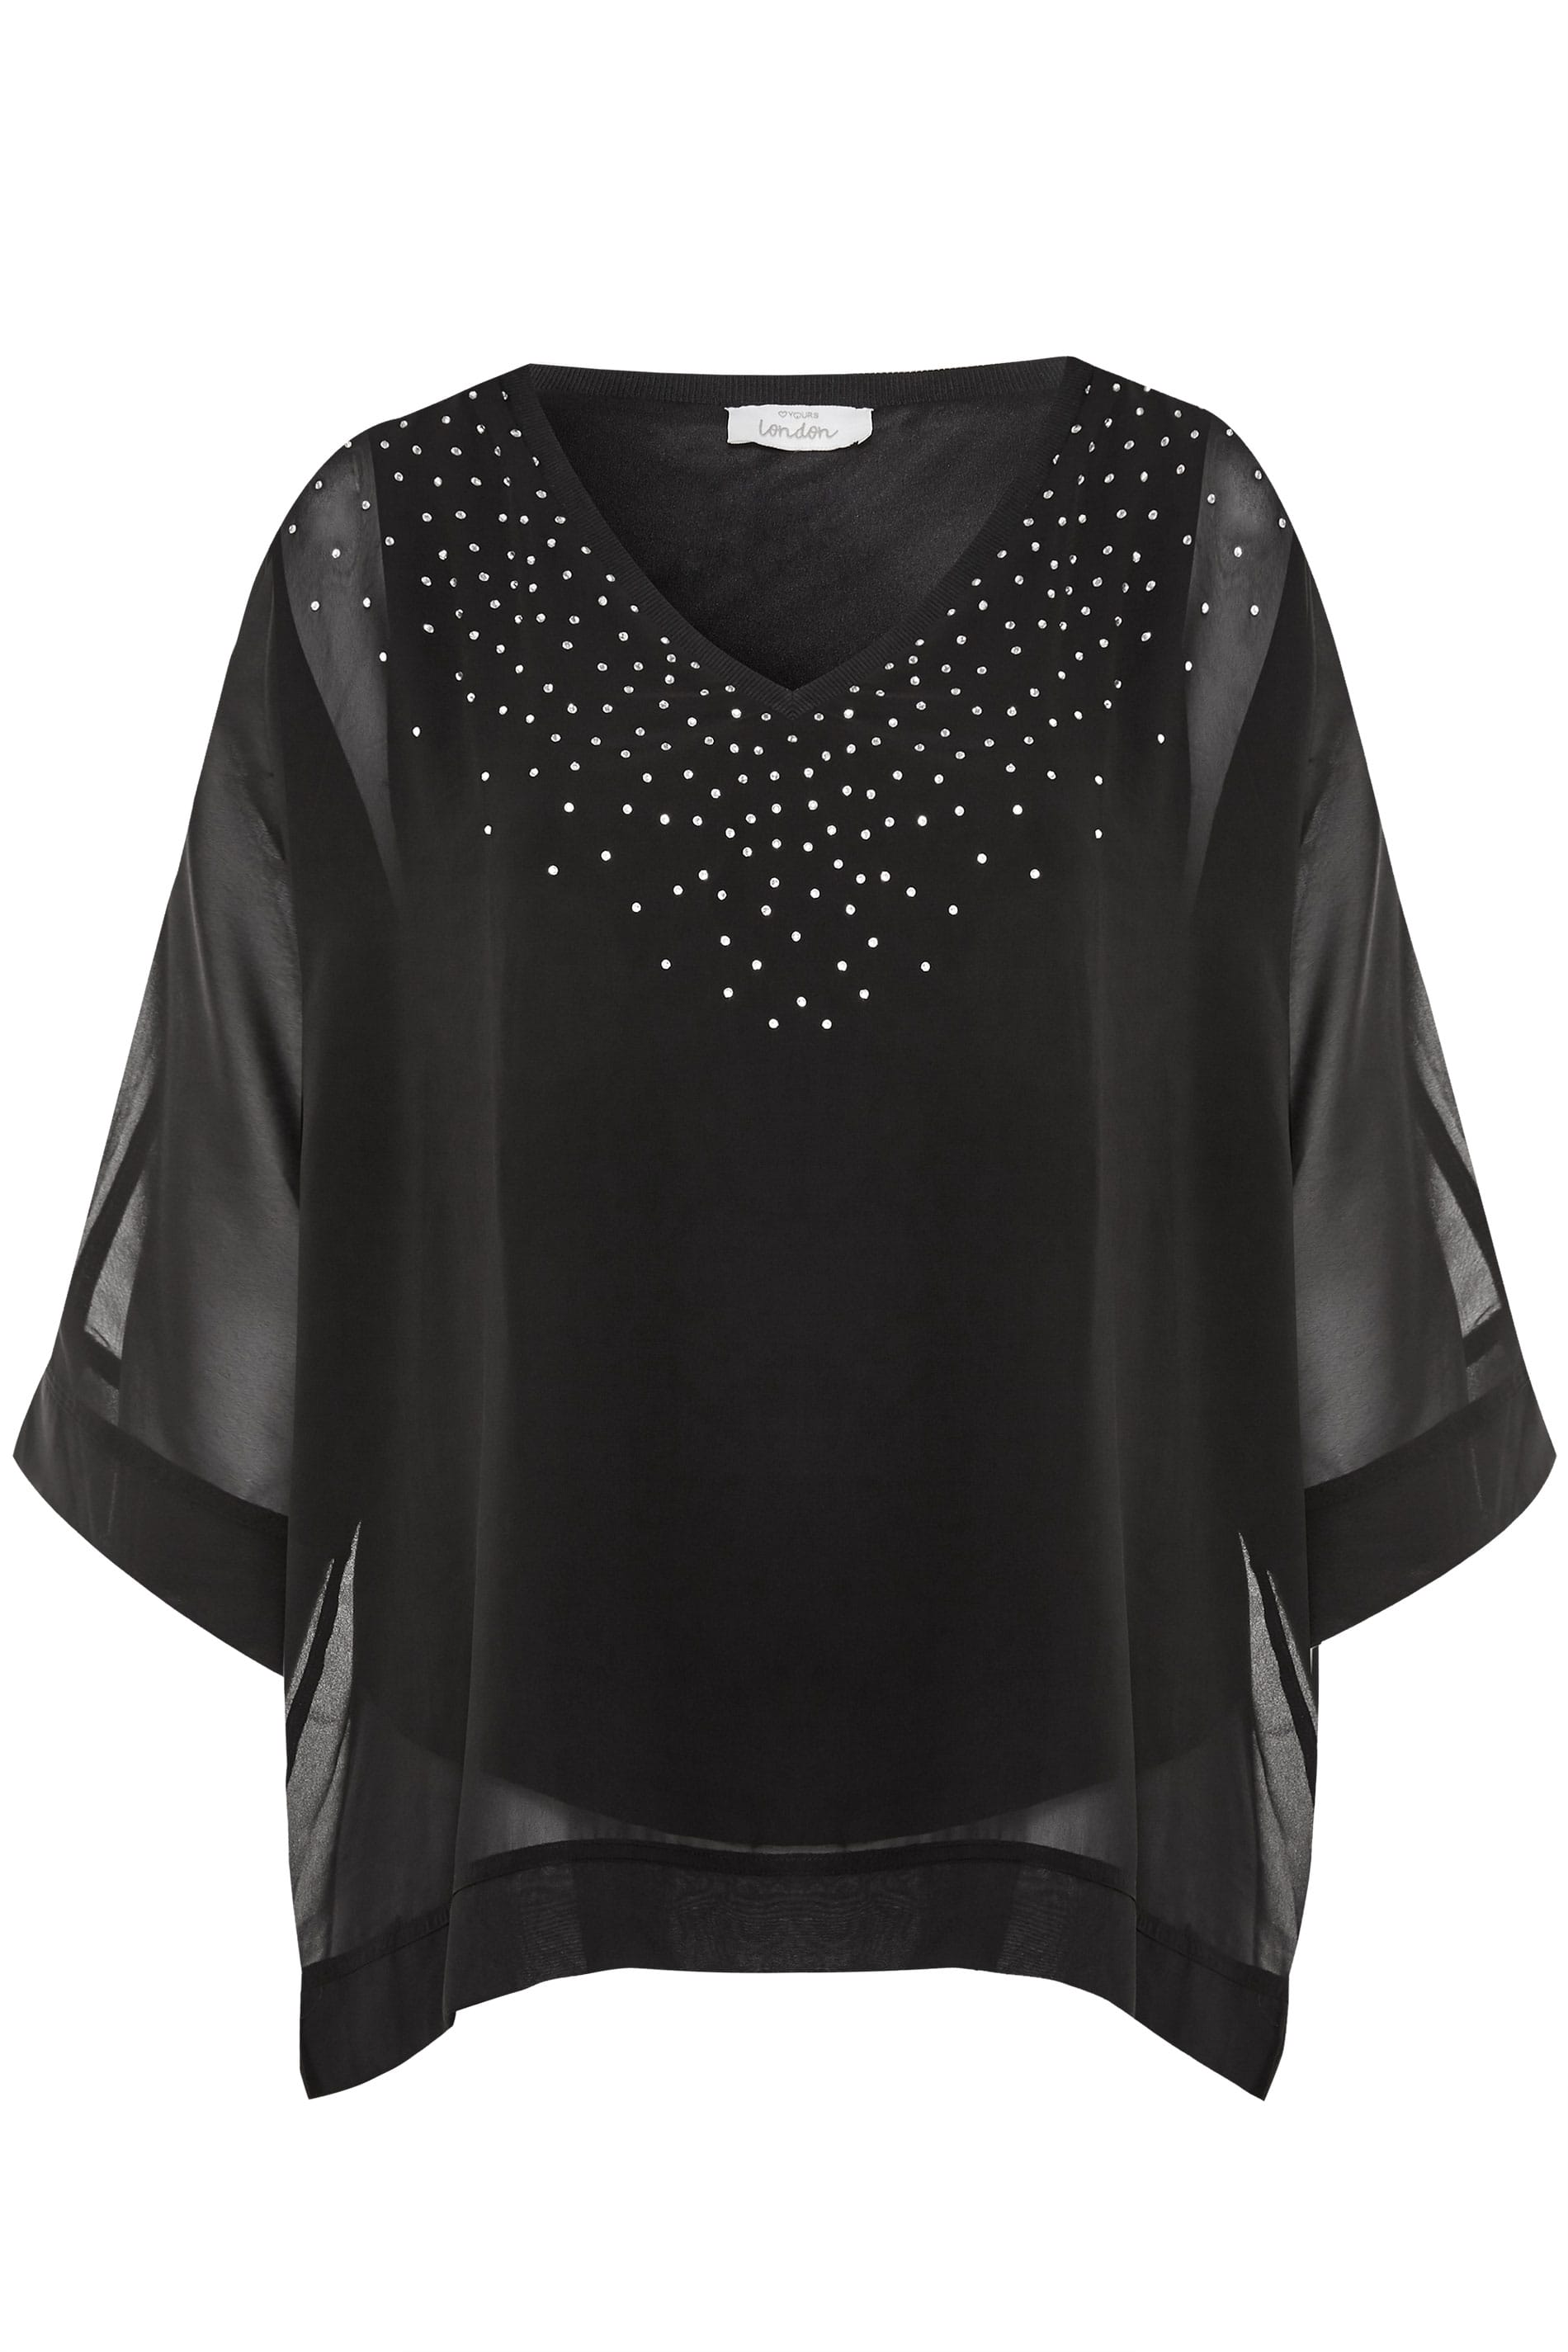 YOURS LONDON Black Diamante Cape Top | Yours Clothing